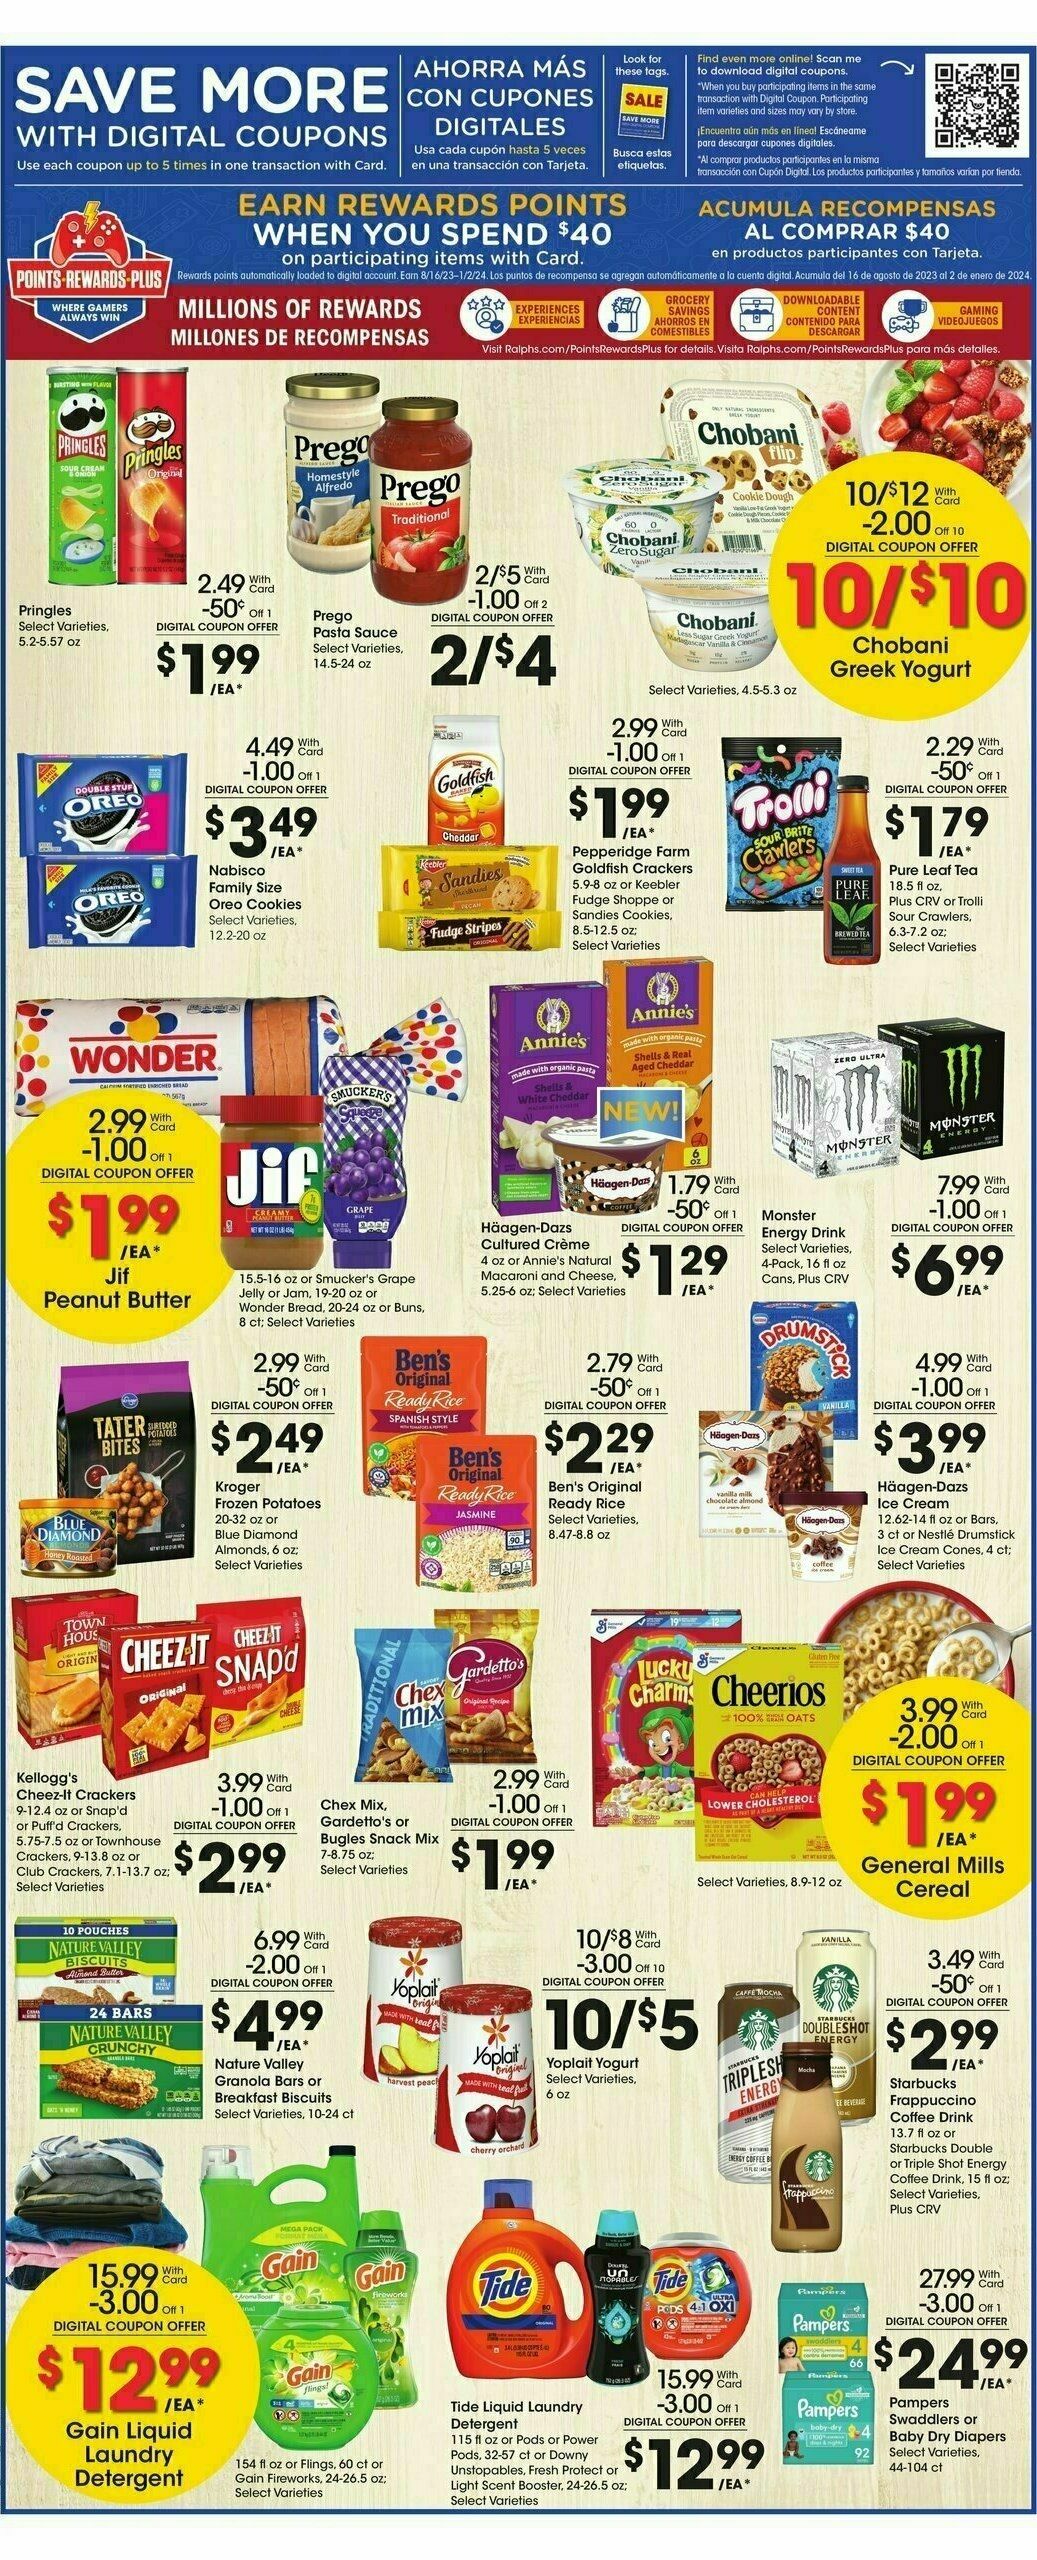 Ralphs Weekly Ad from September 20